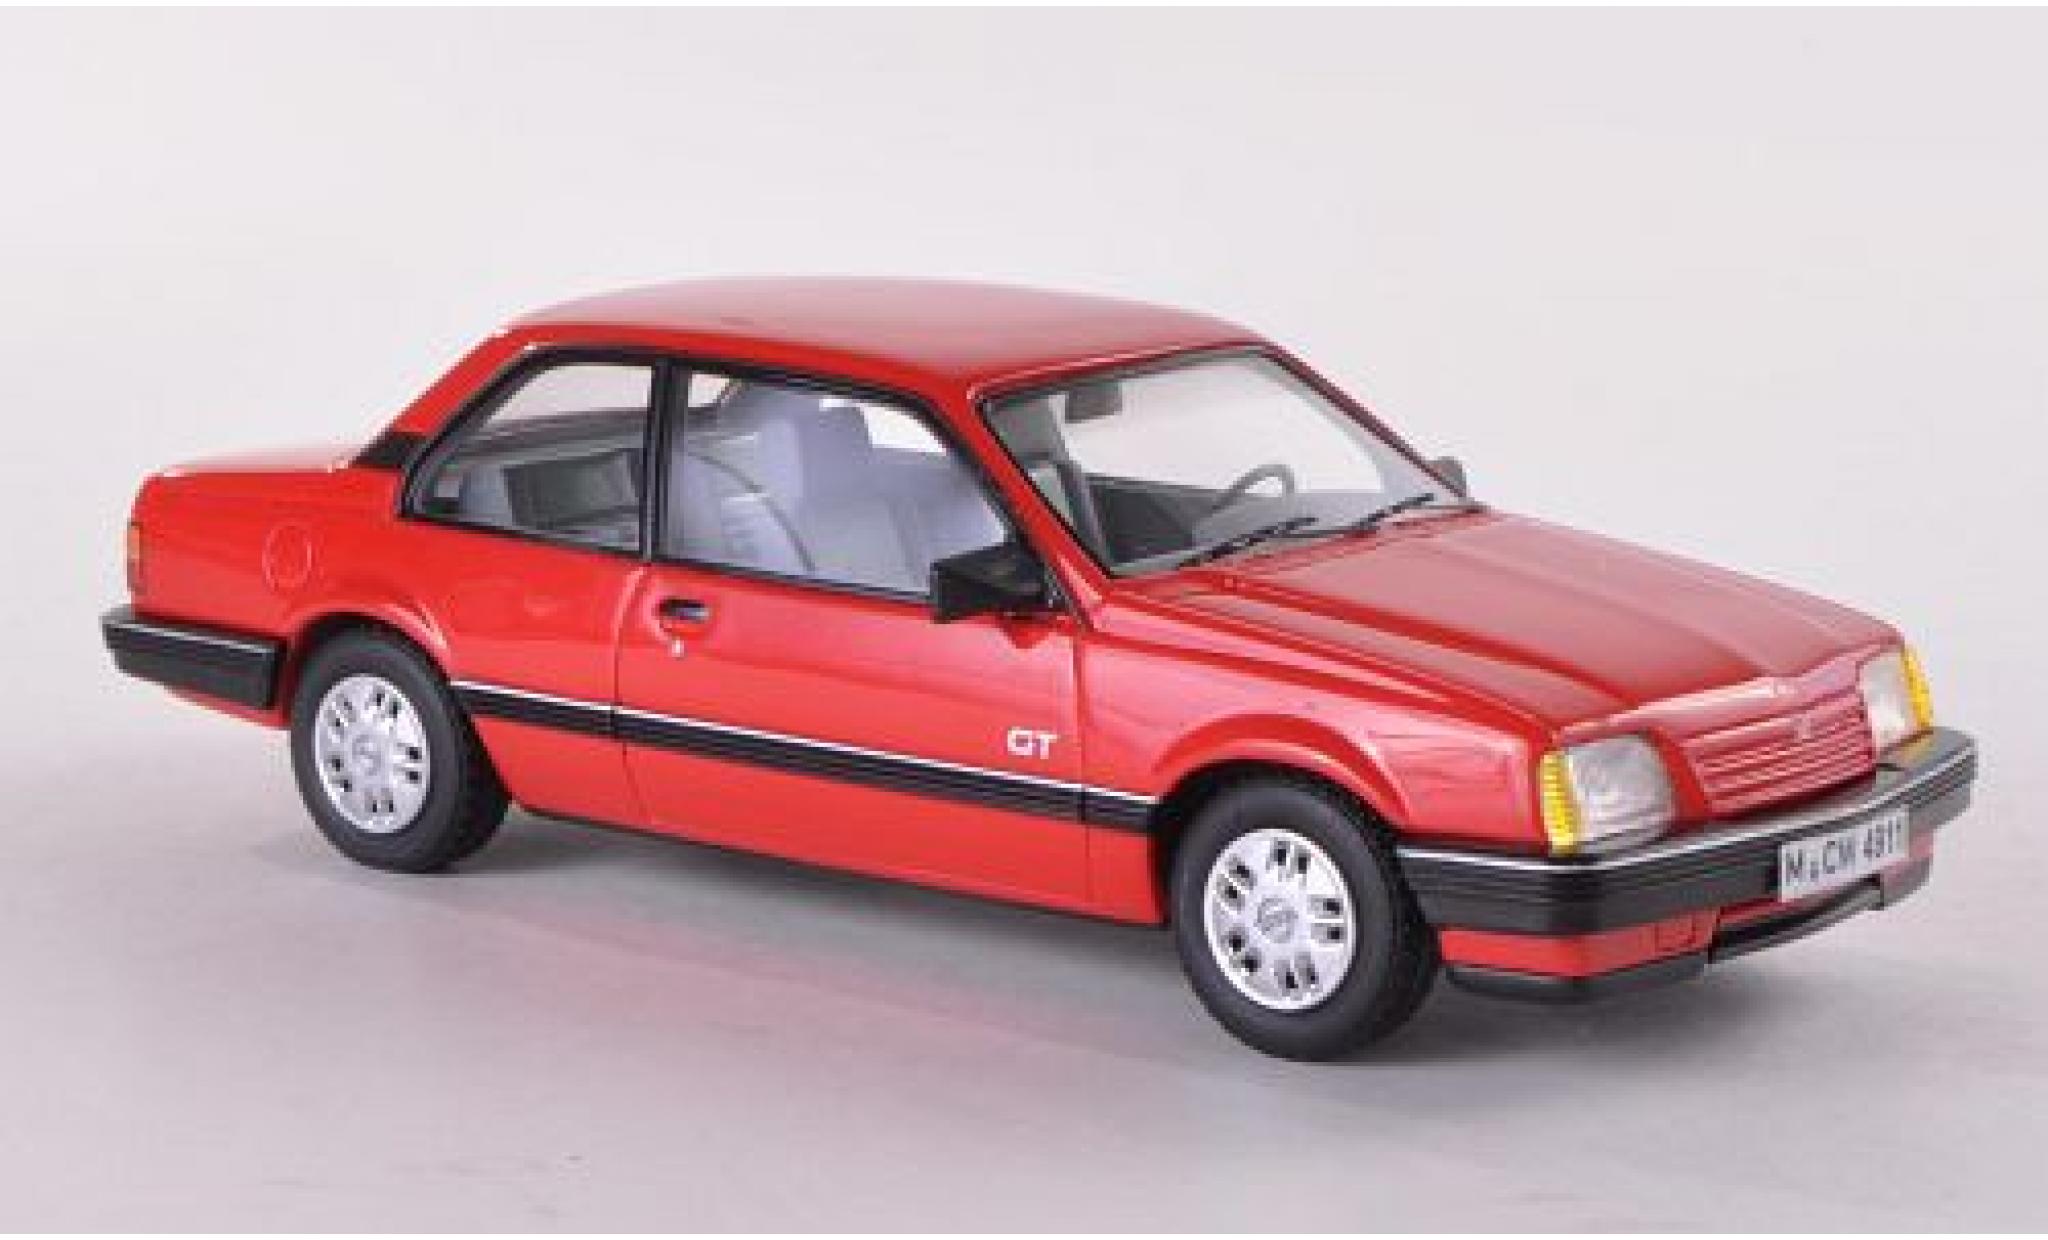 Opel Ascona 1/43 Neo Limited 300 C GT rouge 1986 2-portes